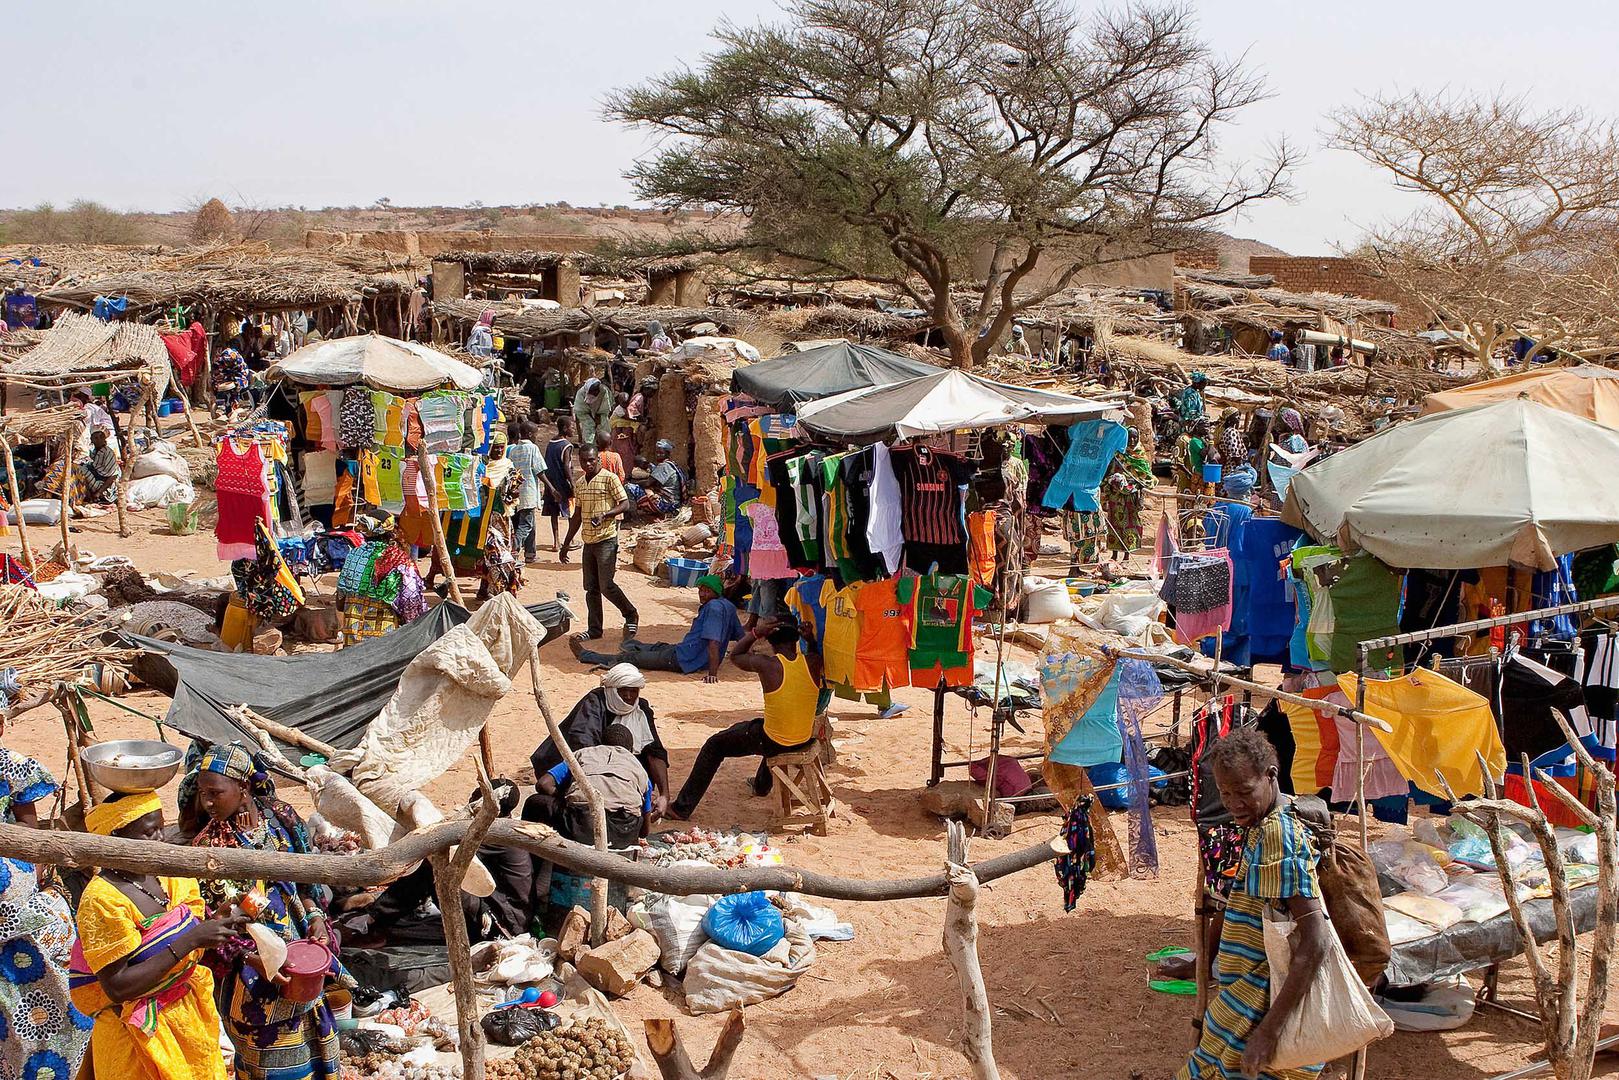 A market day in Symbi, central Mali in 2011. Access to markets by traders of different ethnic groups has been undermined by attacks carried out by Islamist armed groups and ethnic self-defense groups.